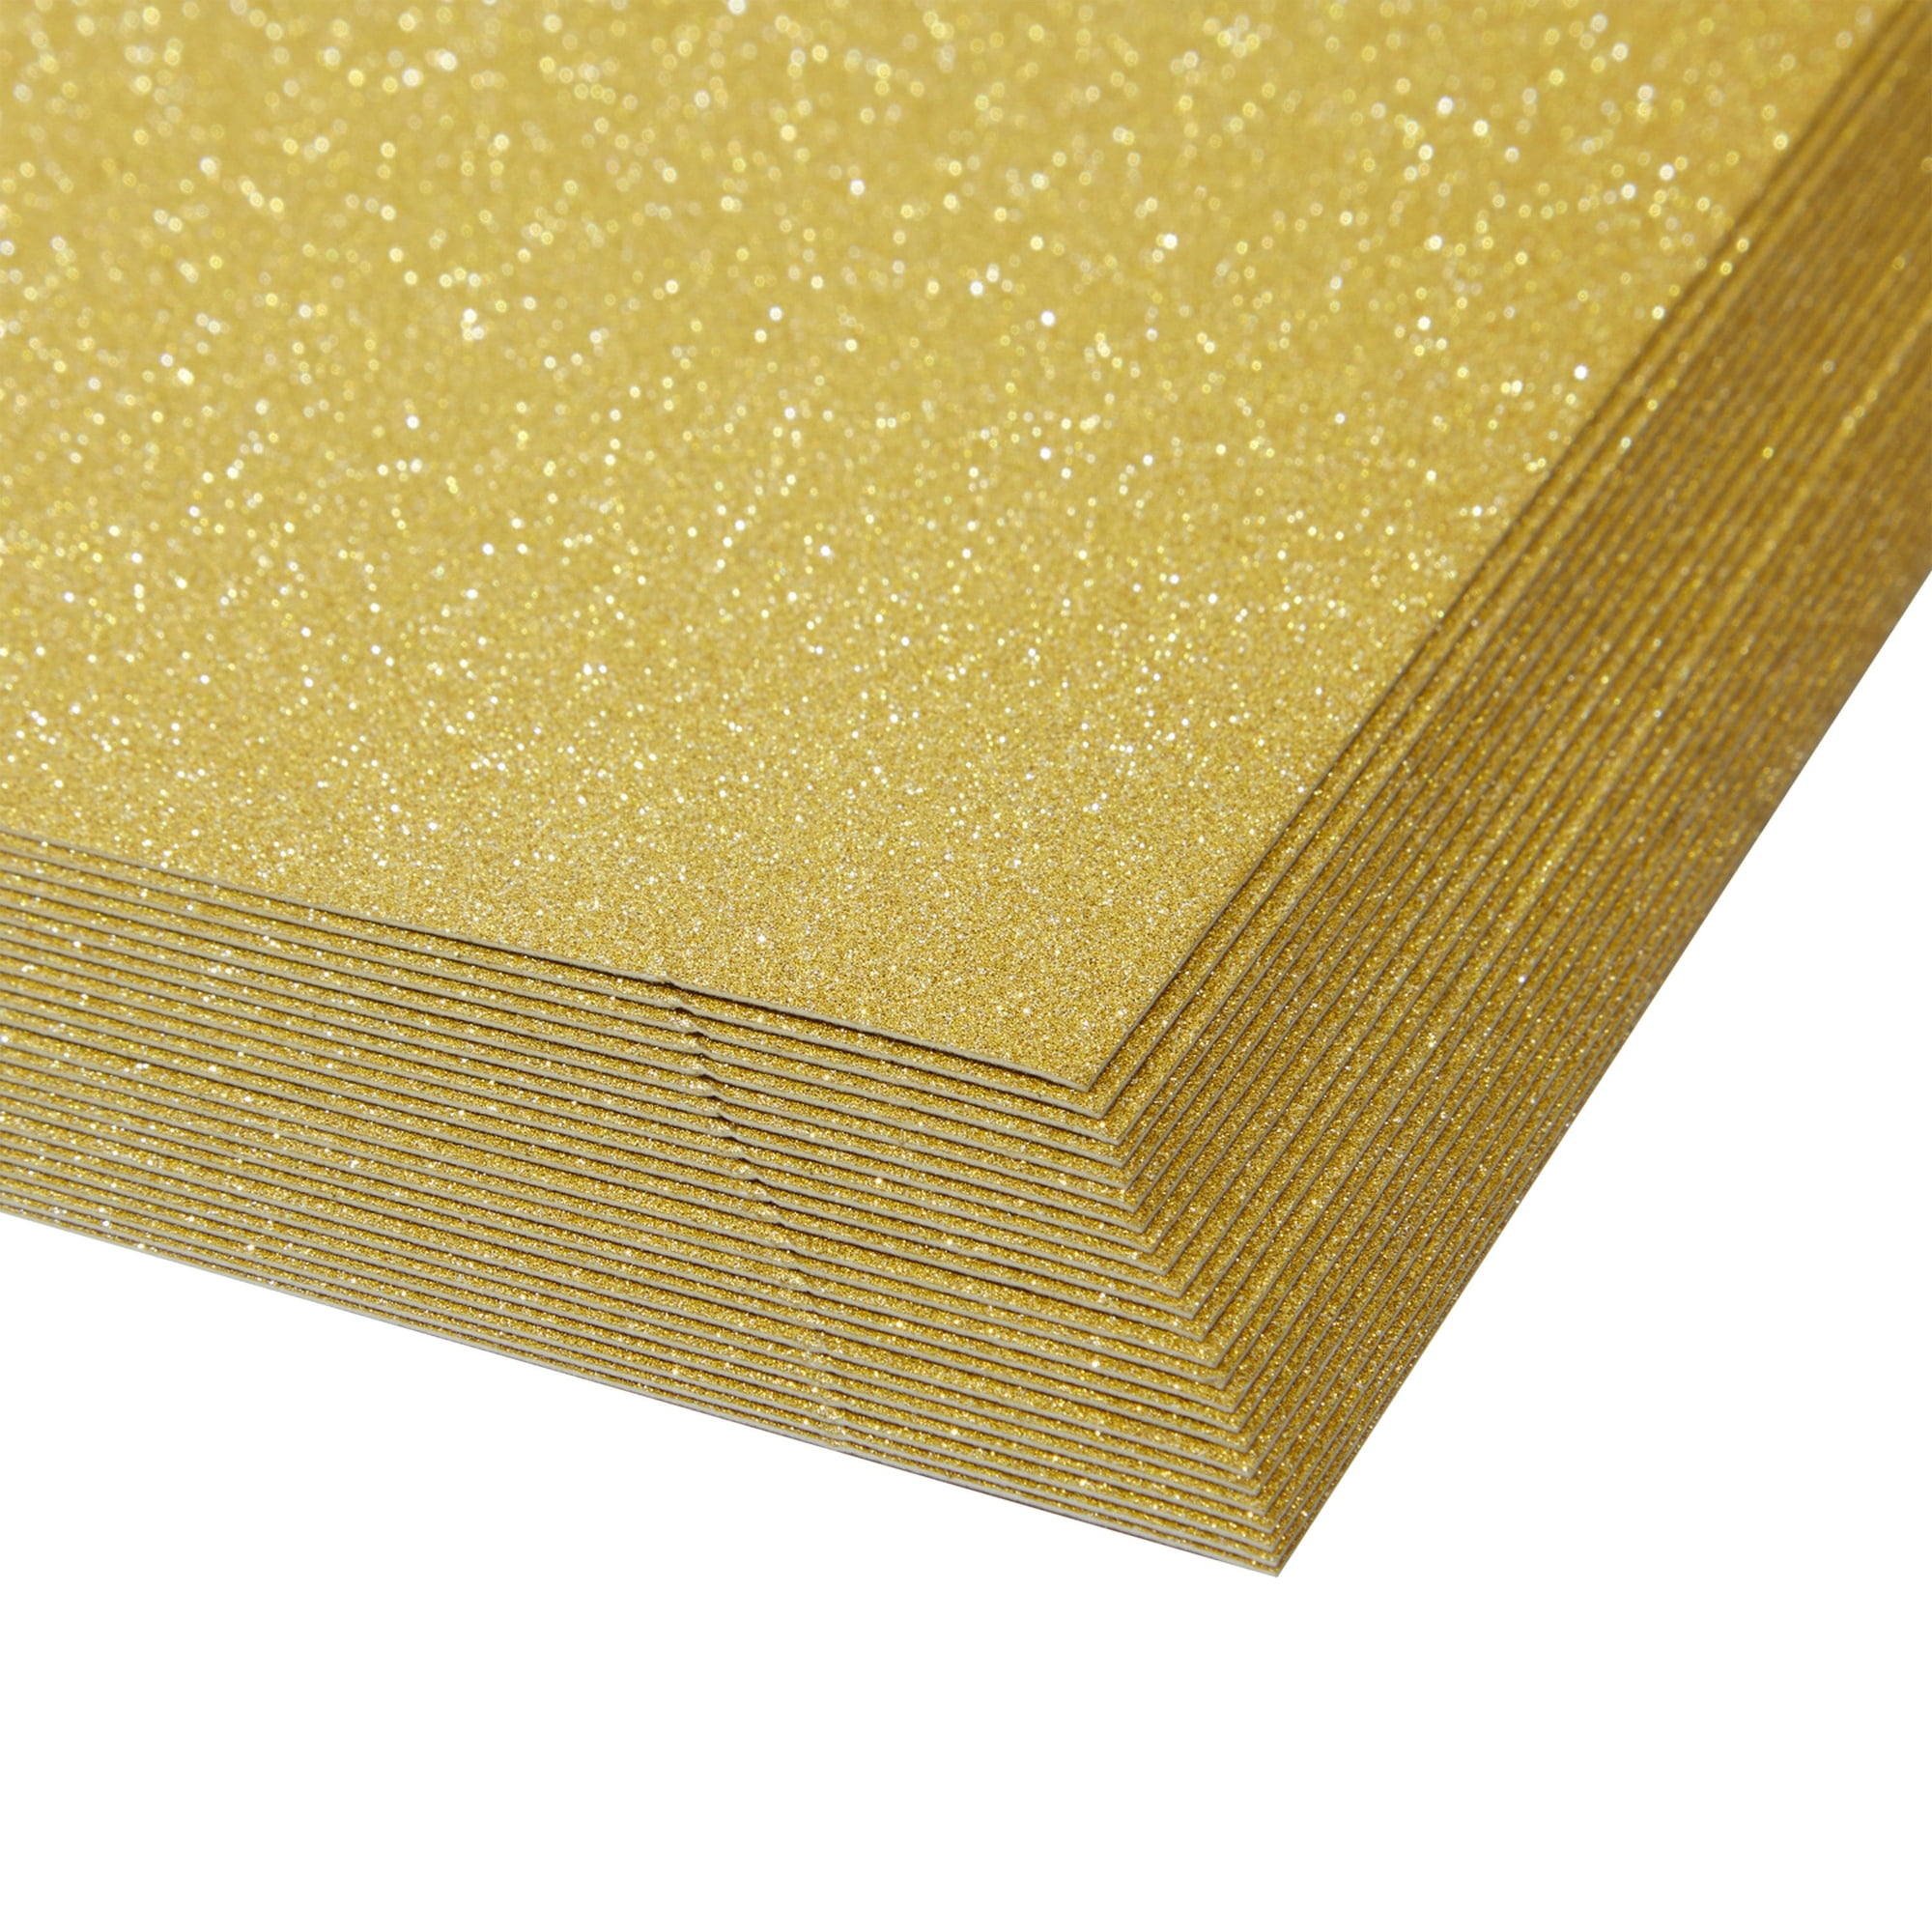 Gold Glitter Cardstock - One-sided - Non-Adhesive - 20 Pack - 8.5 x 11  Inches - Premium Glittery Sheets for DIY Crafts, Art Projects, Party Decor